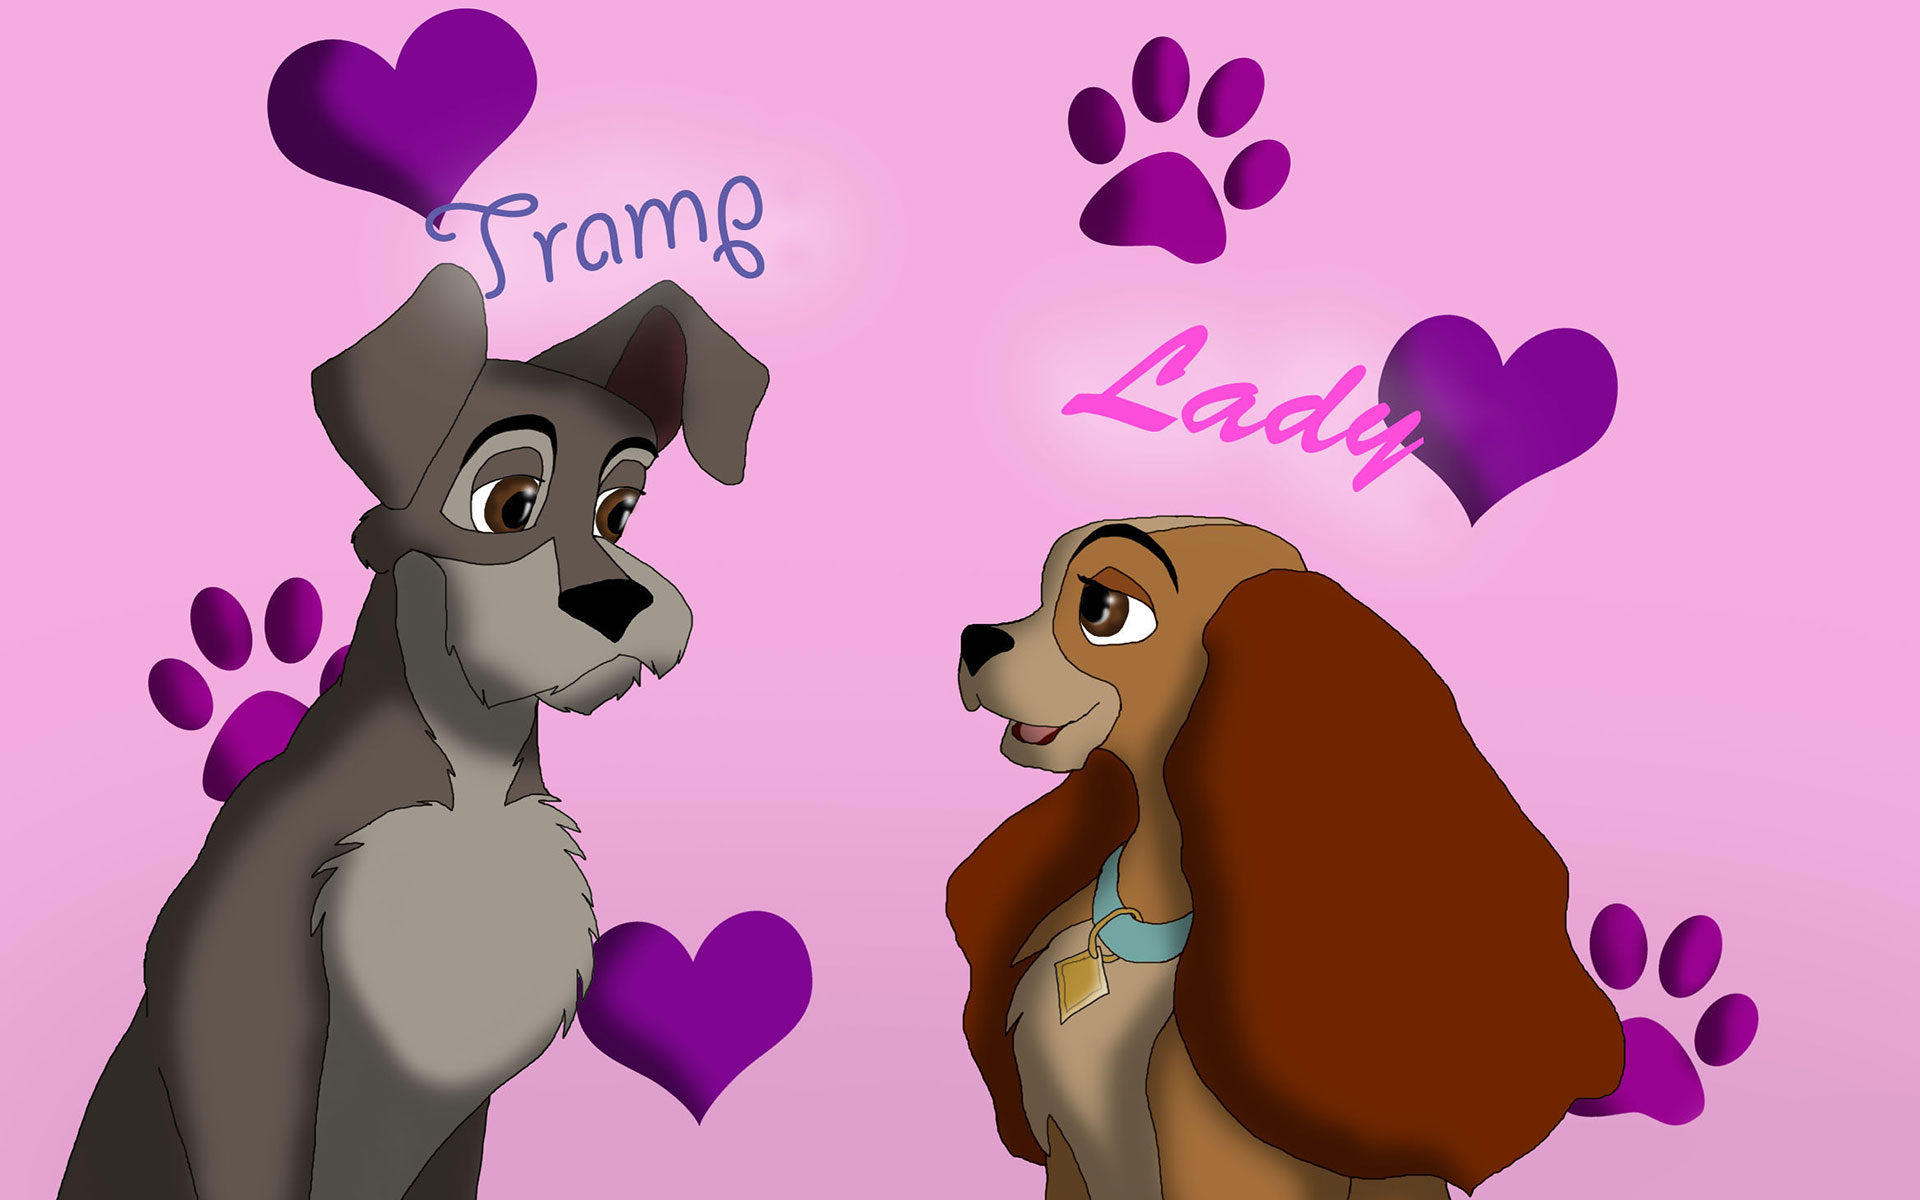 Lady And The Tramp Wallpapers